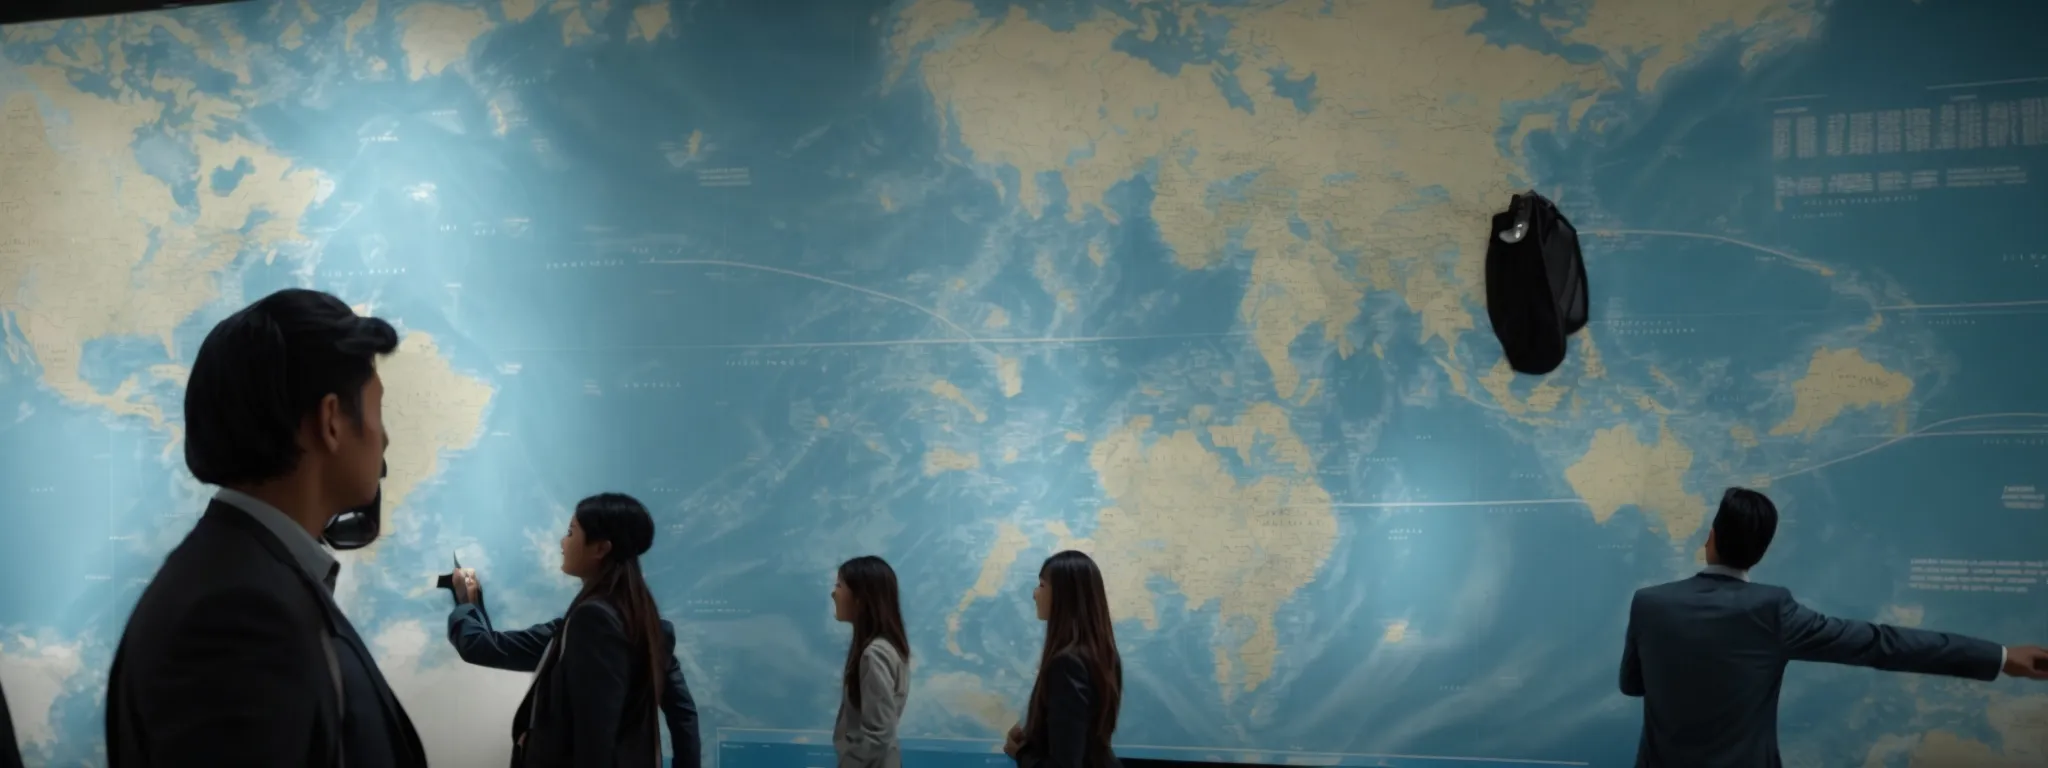 a diverse group of people engaging with a large interactive world map displayed on a sleek digital touchscreen wall.